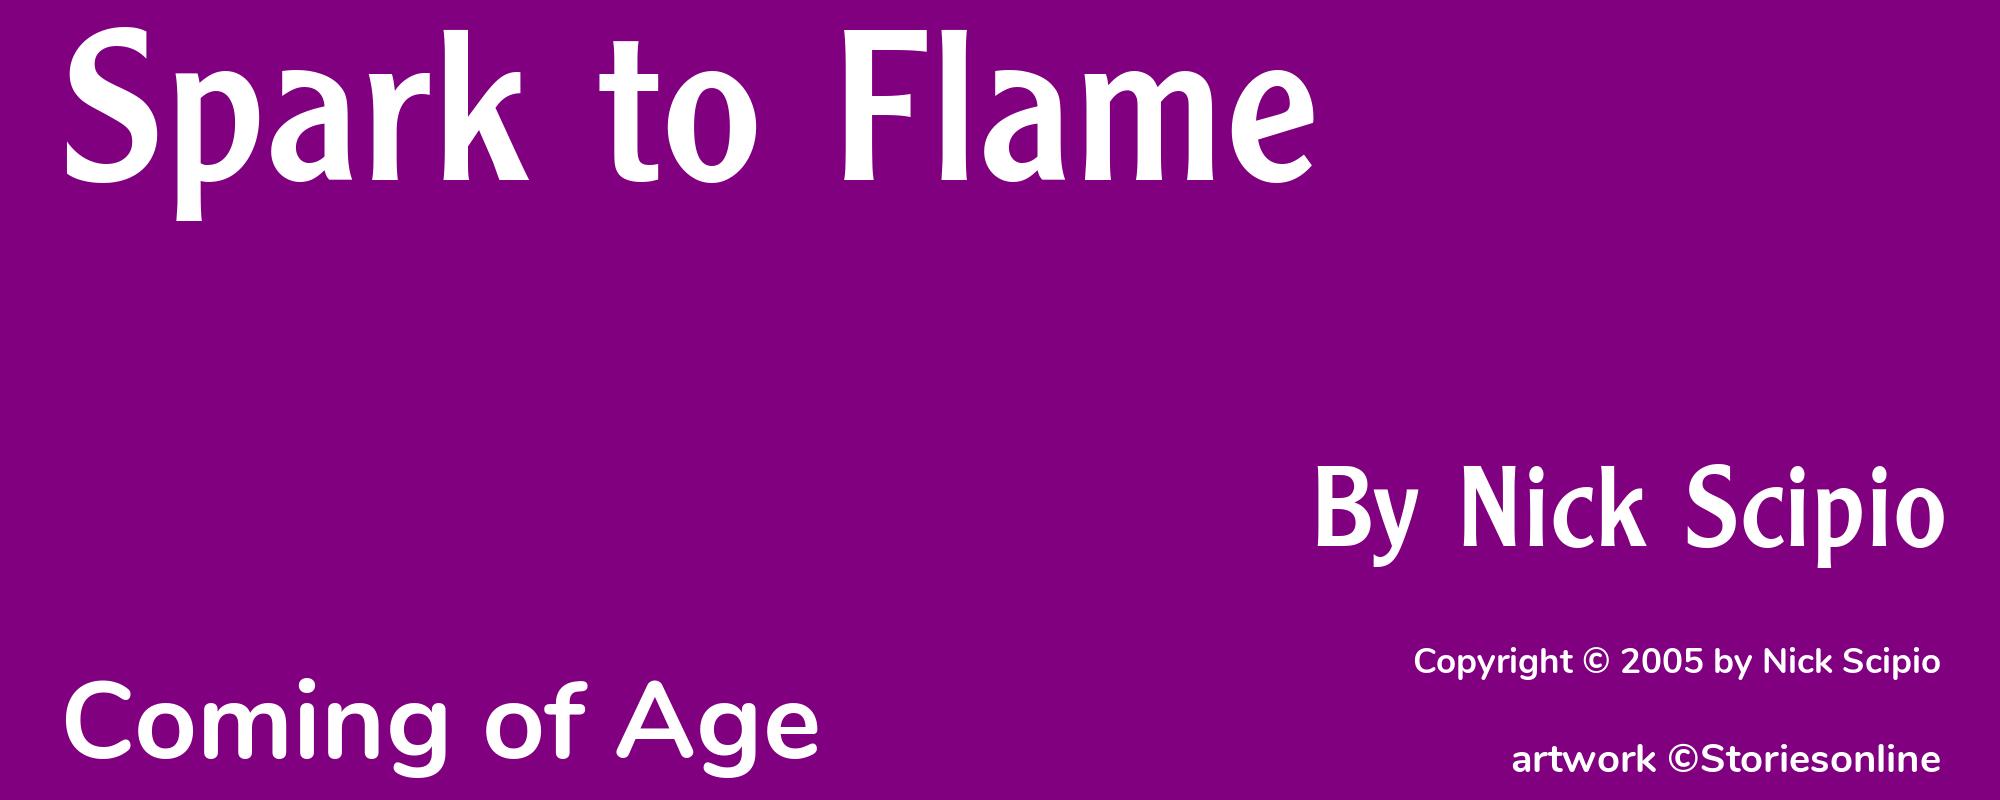 Spark to Flame - Cover